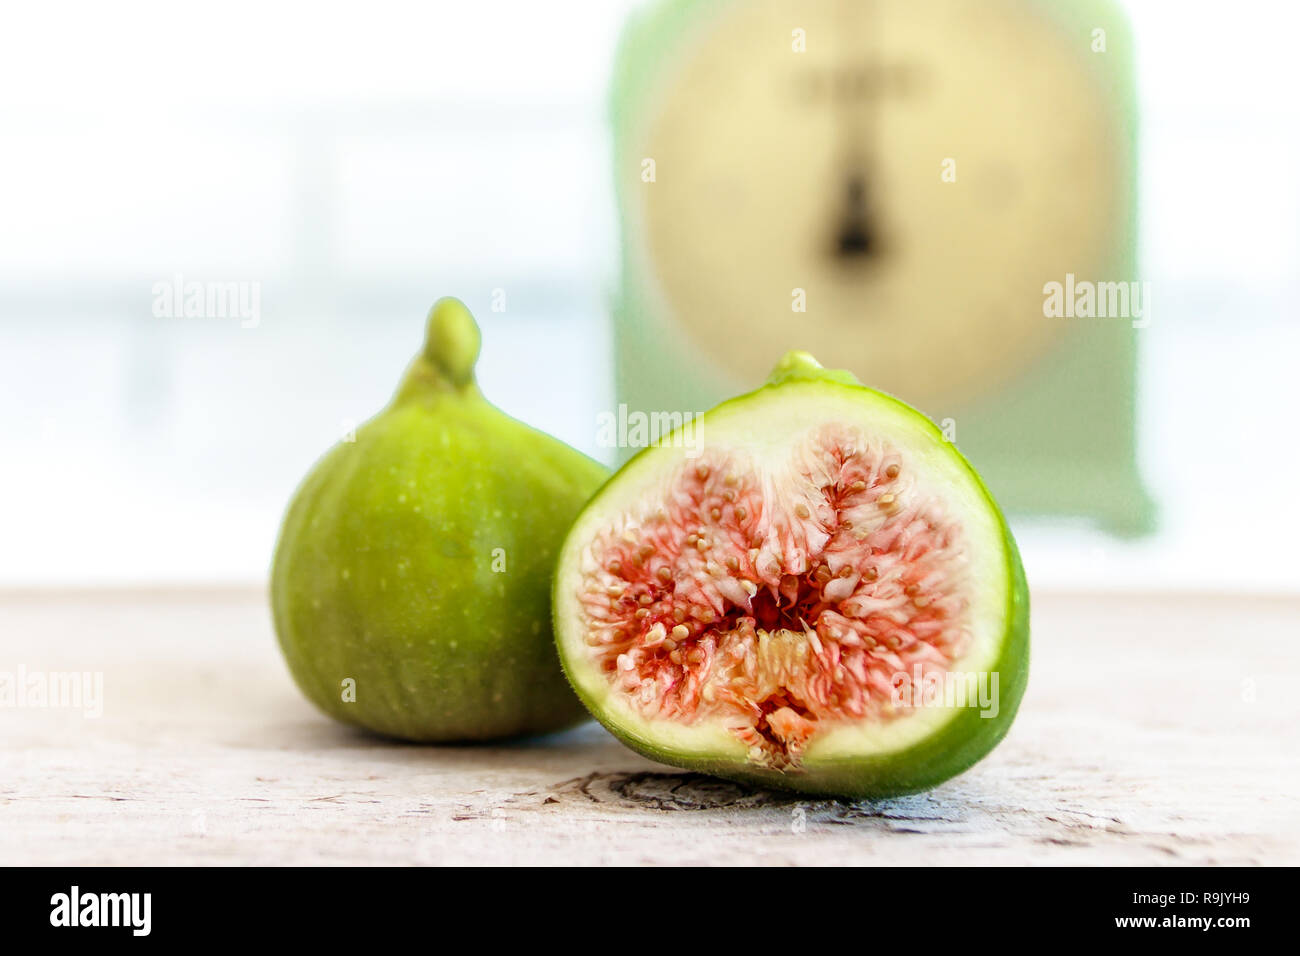 Retro / antique kitchen scale and ripe, halved figs on natural wood table Stock Photo